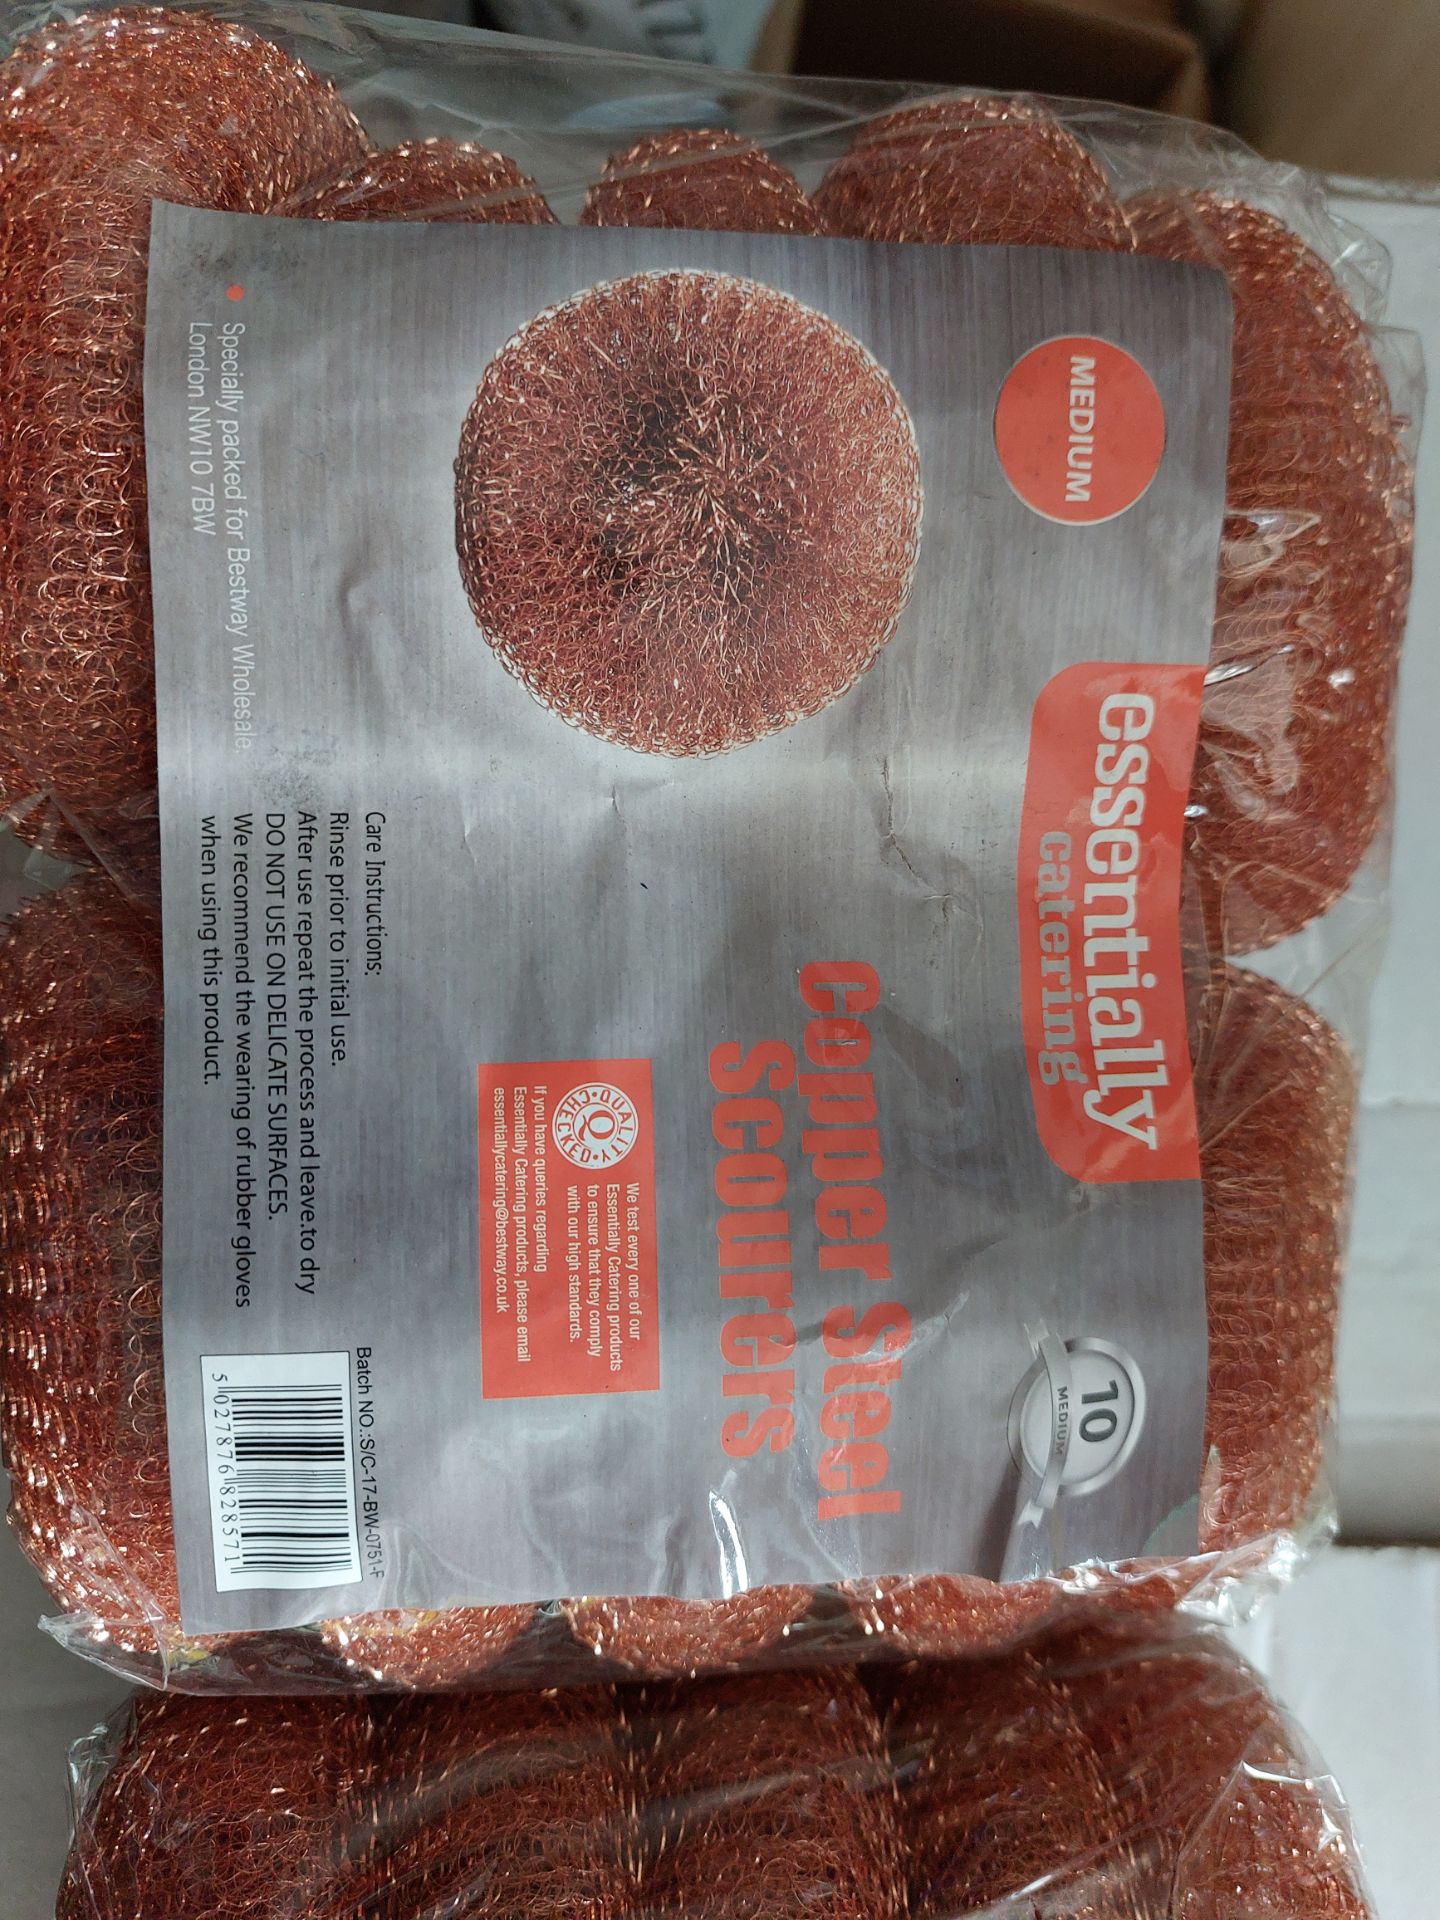 Box of 6 Packs of 10 Scourers - Image 3 of 5